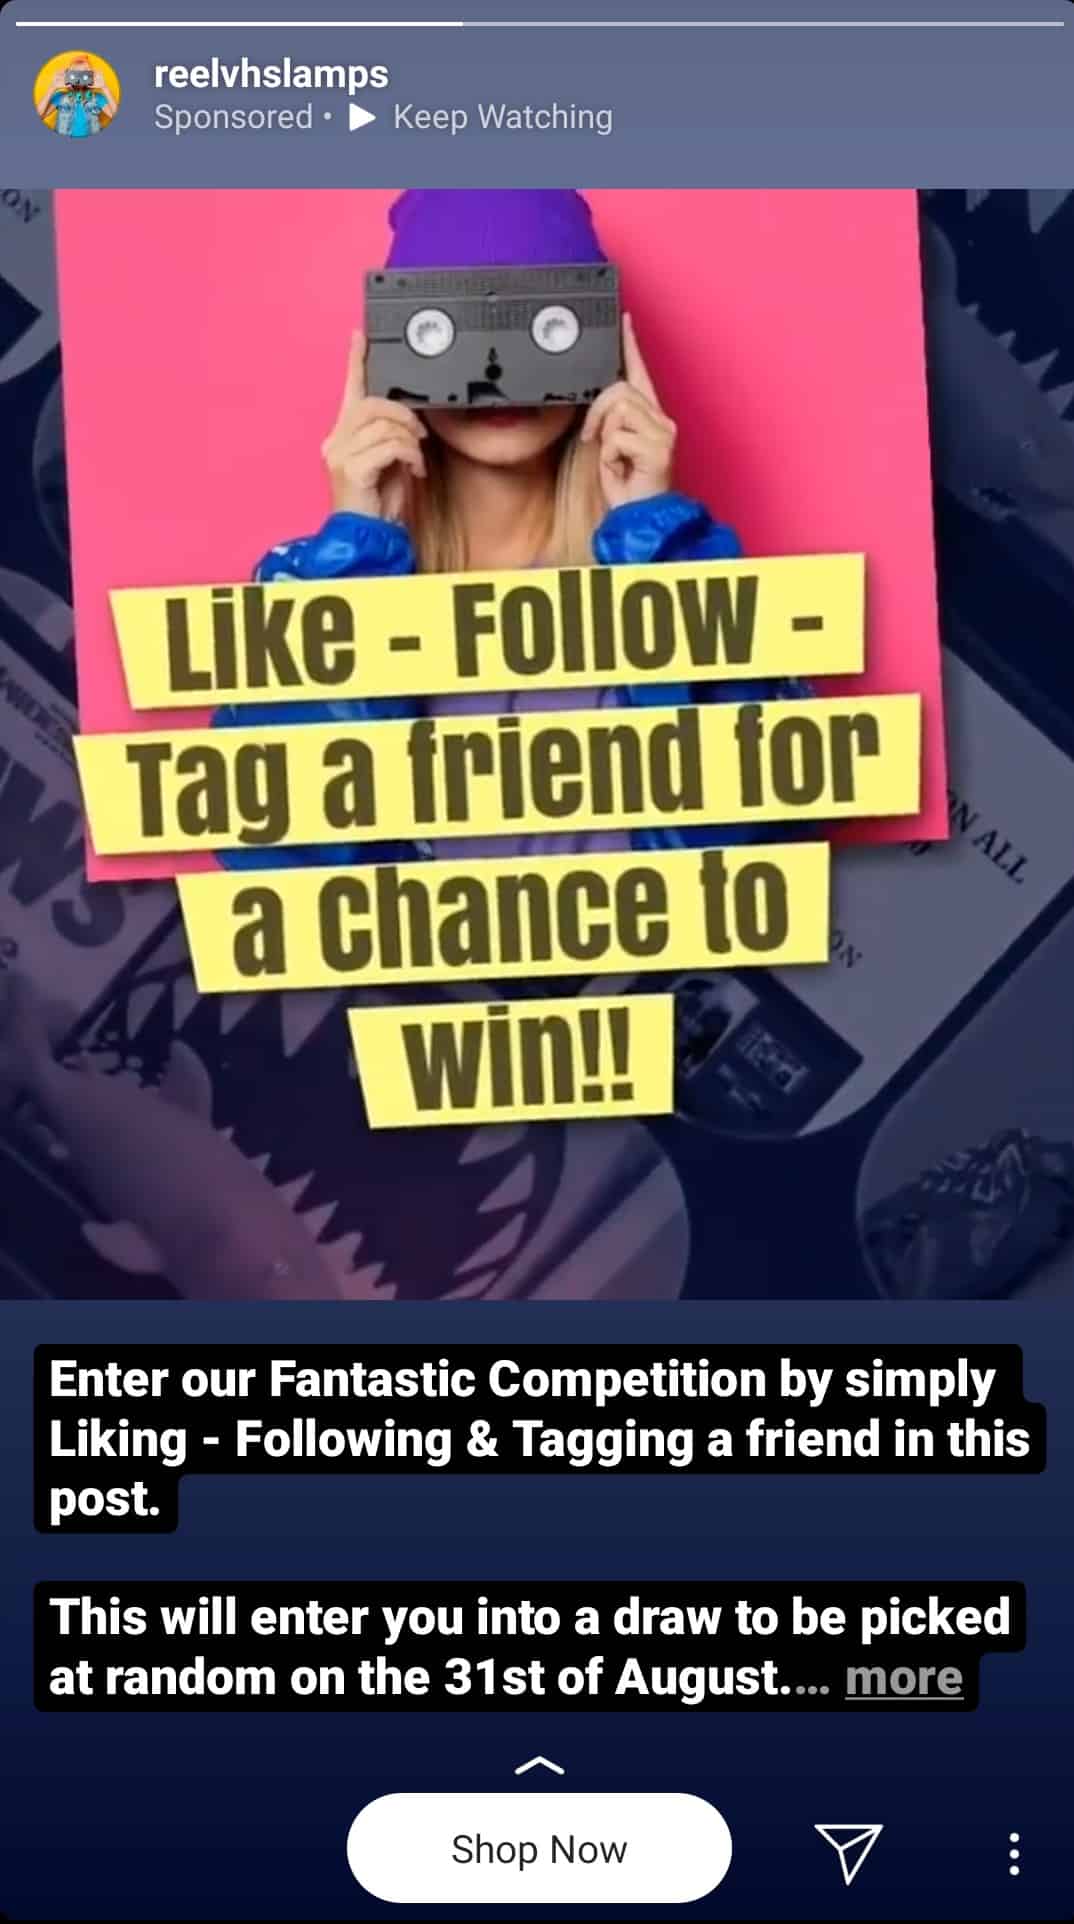 An Instagram stories advert inviting people to like, follow and tag a friend